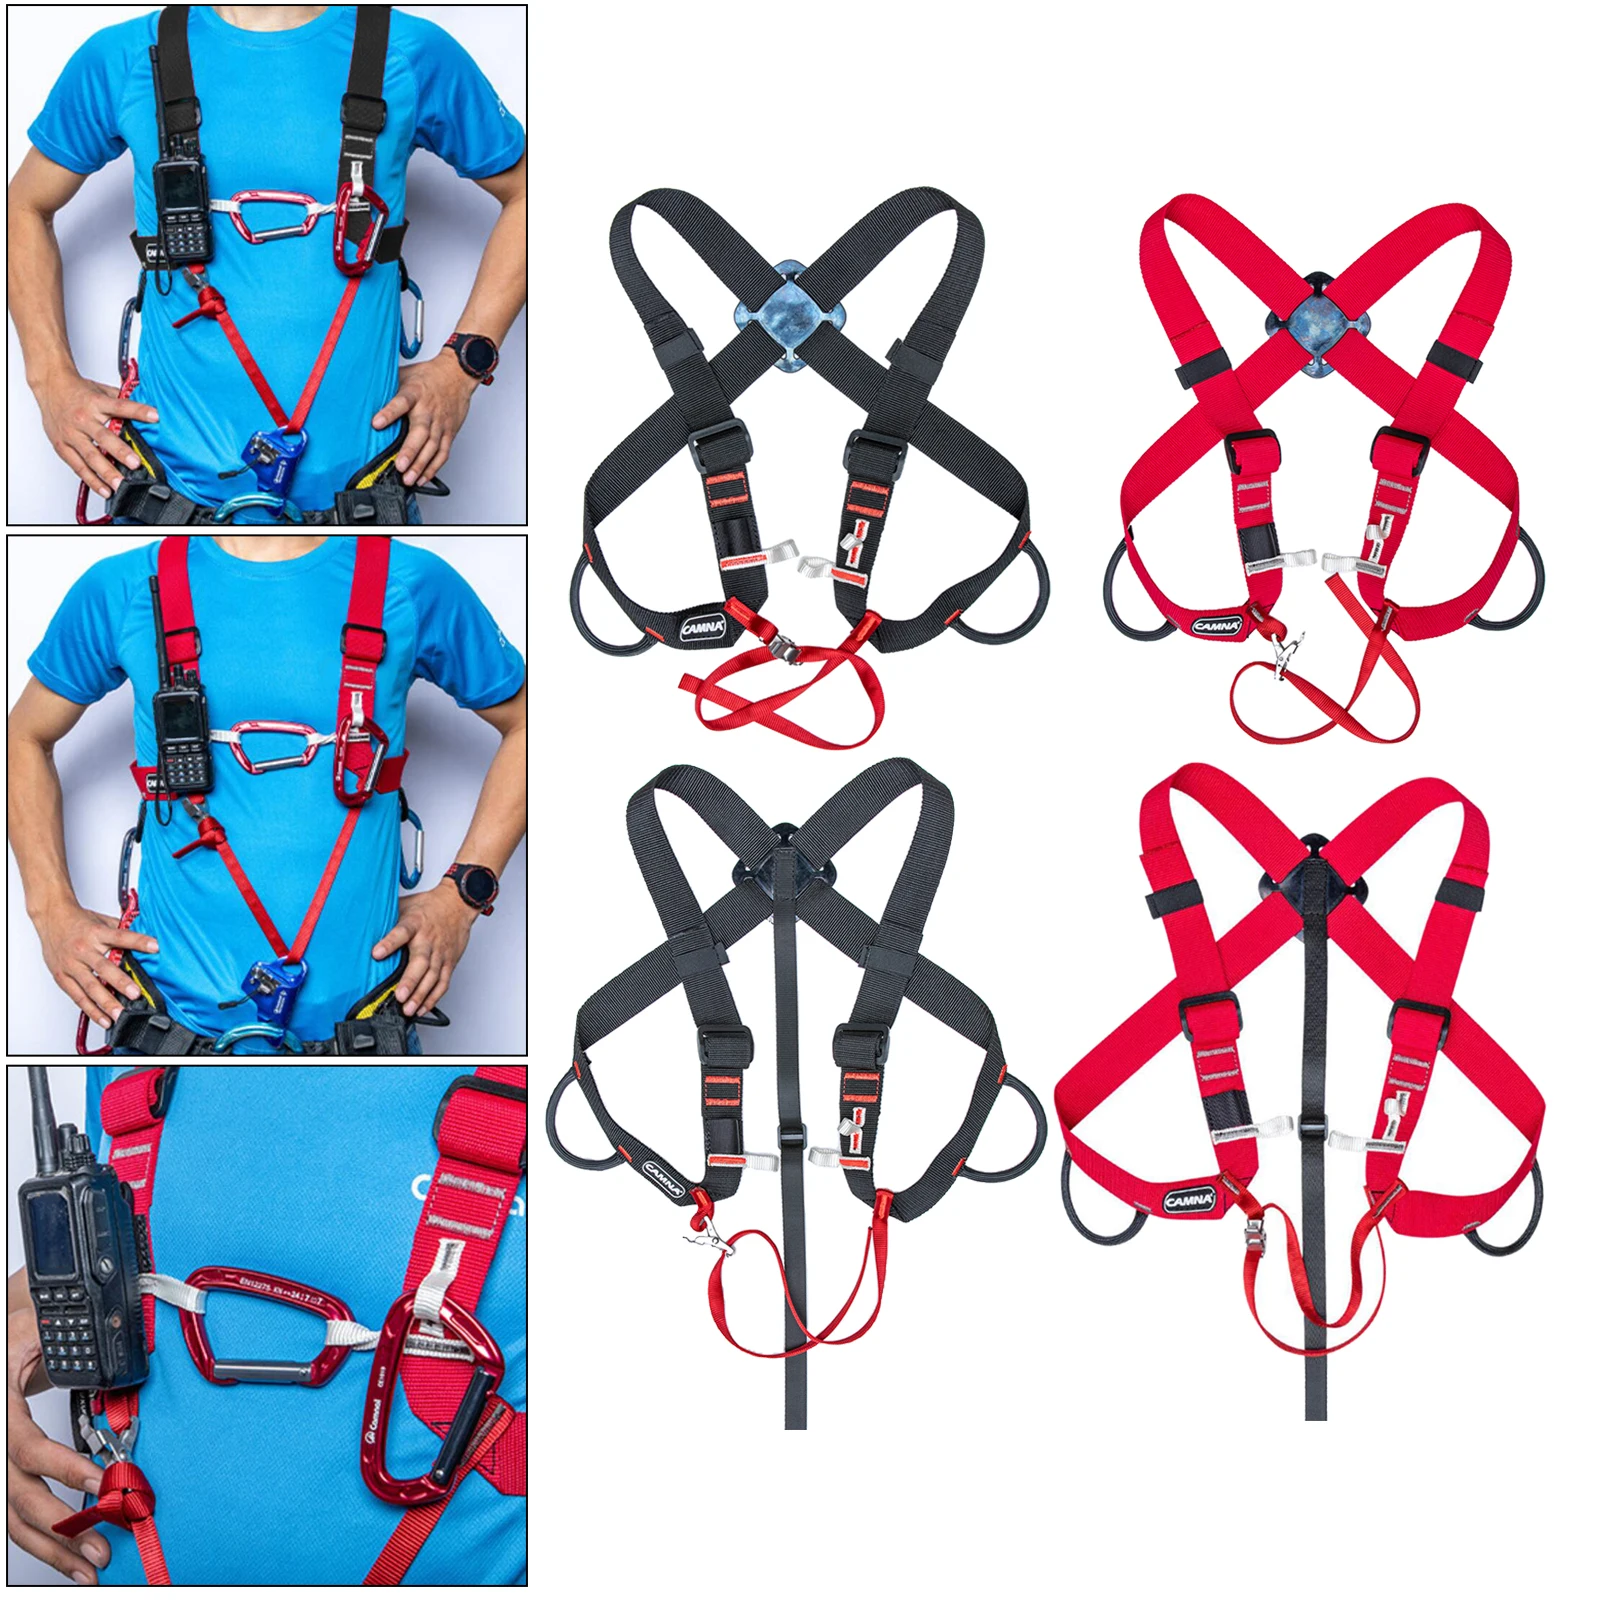 Climbing Safety Harness Ascending Straps Adjustable Fixed Belt Caving Canyoning Survival